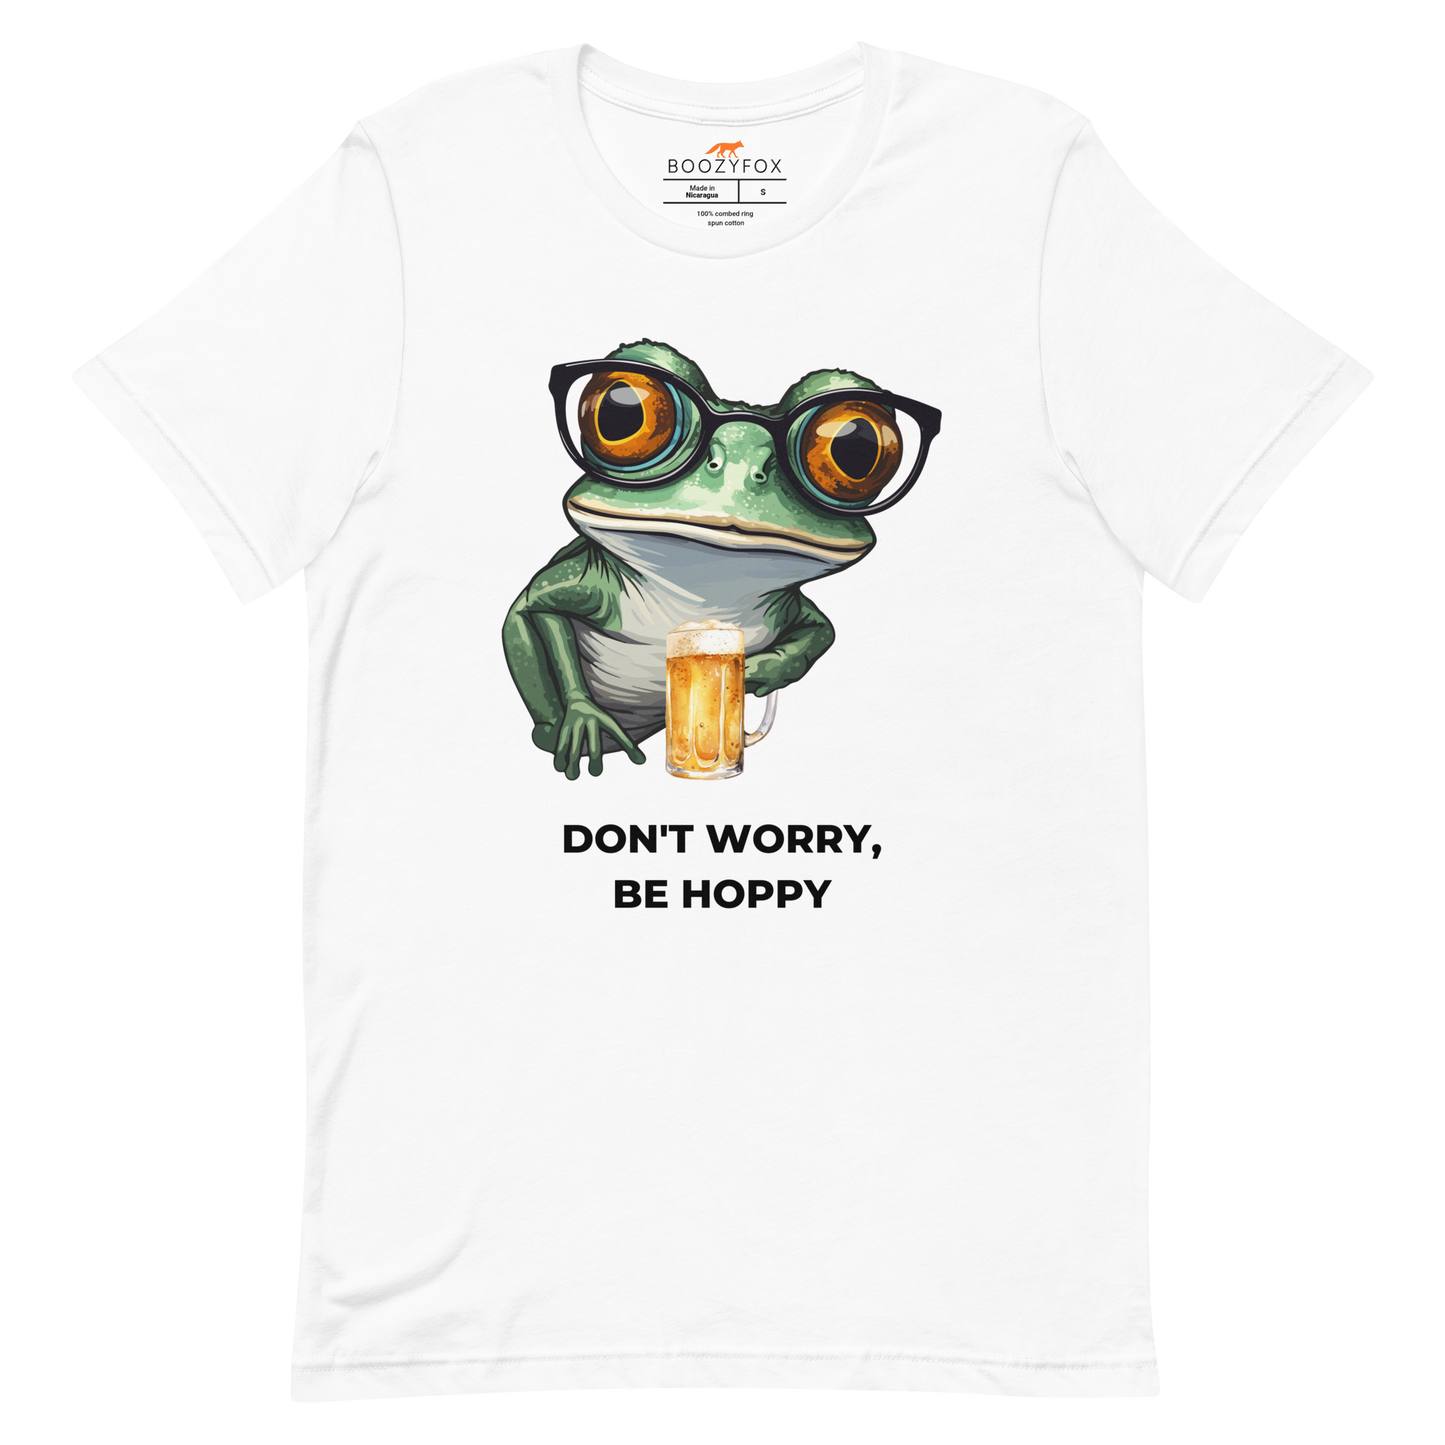 White Premium Frog Tee featuring a funny Don't Worry, Be Hoppy graphic on the chest - Funny Graphic Frog Tees - Boozy Fox